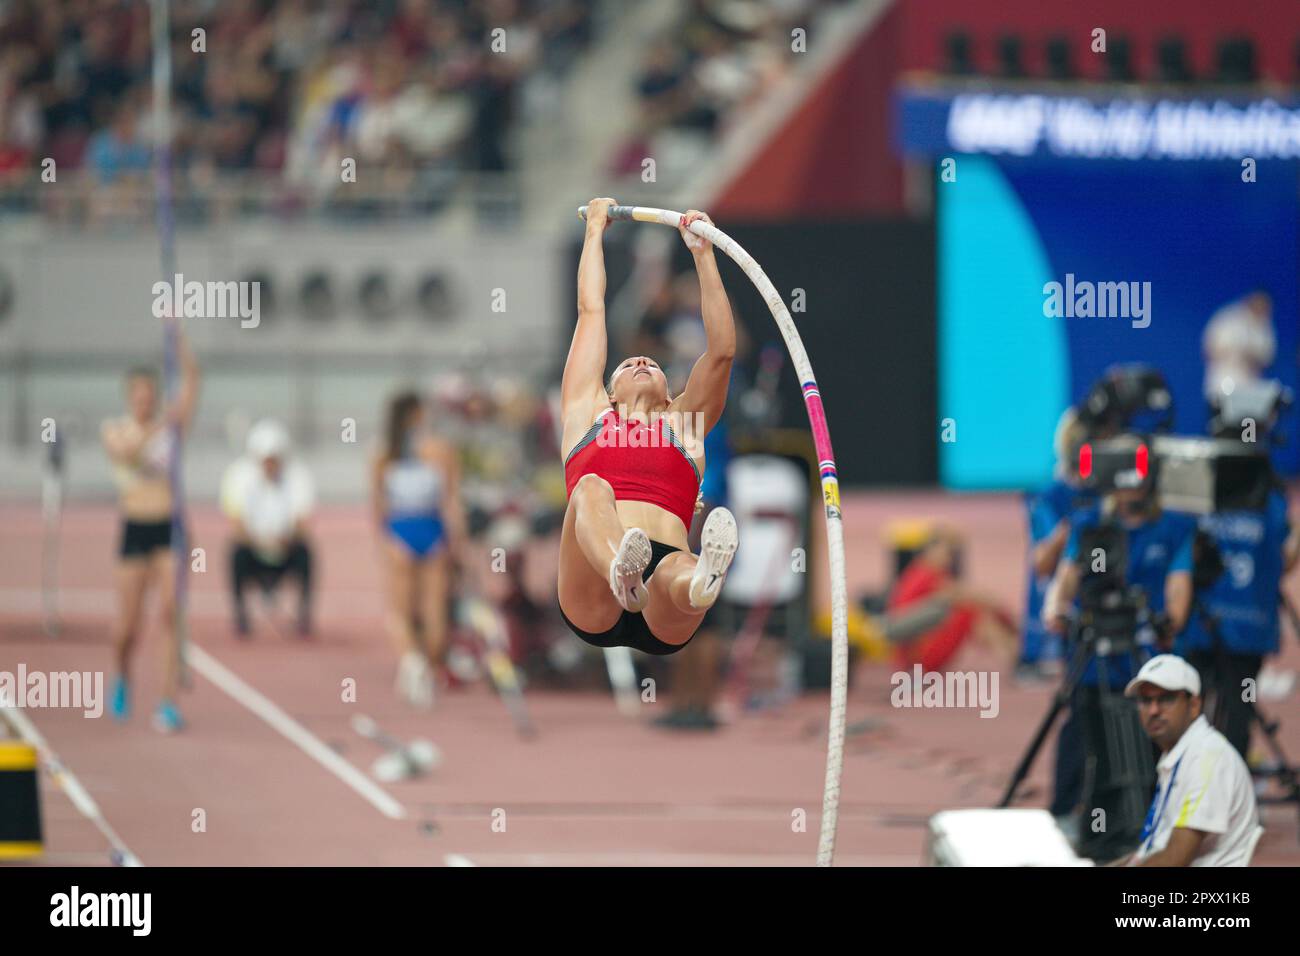 Angelica Moser Participating In The Pole Vault At The Doha 2019 World